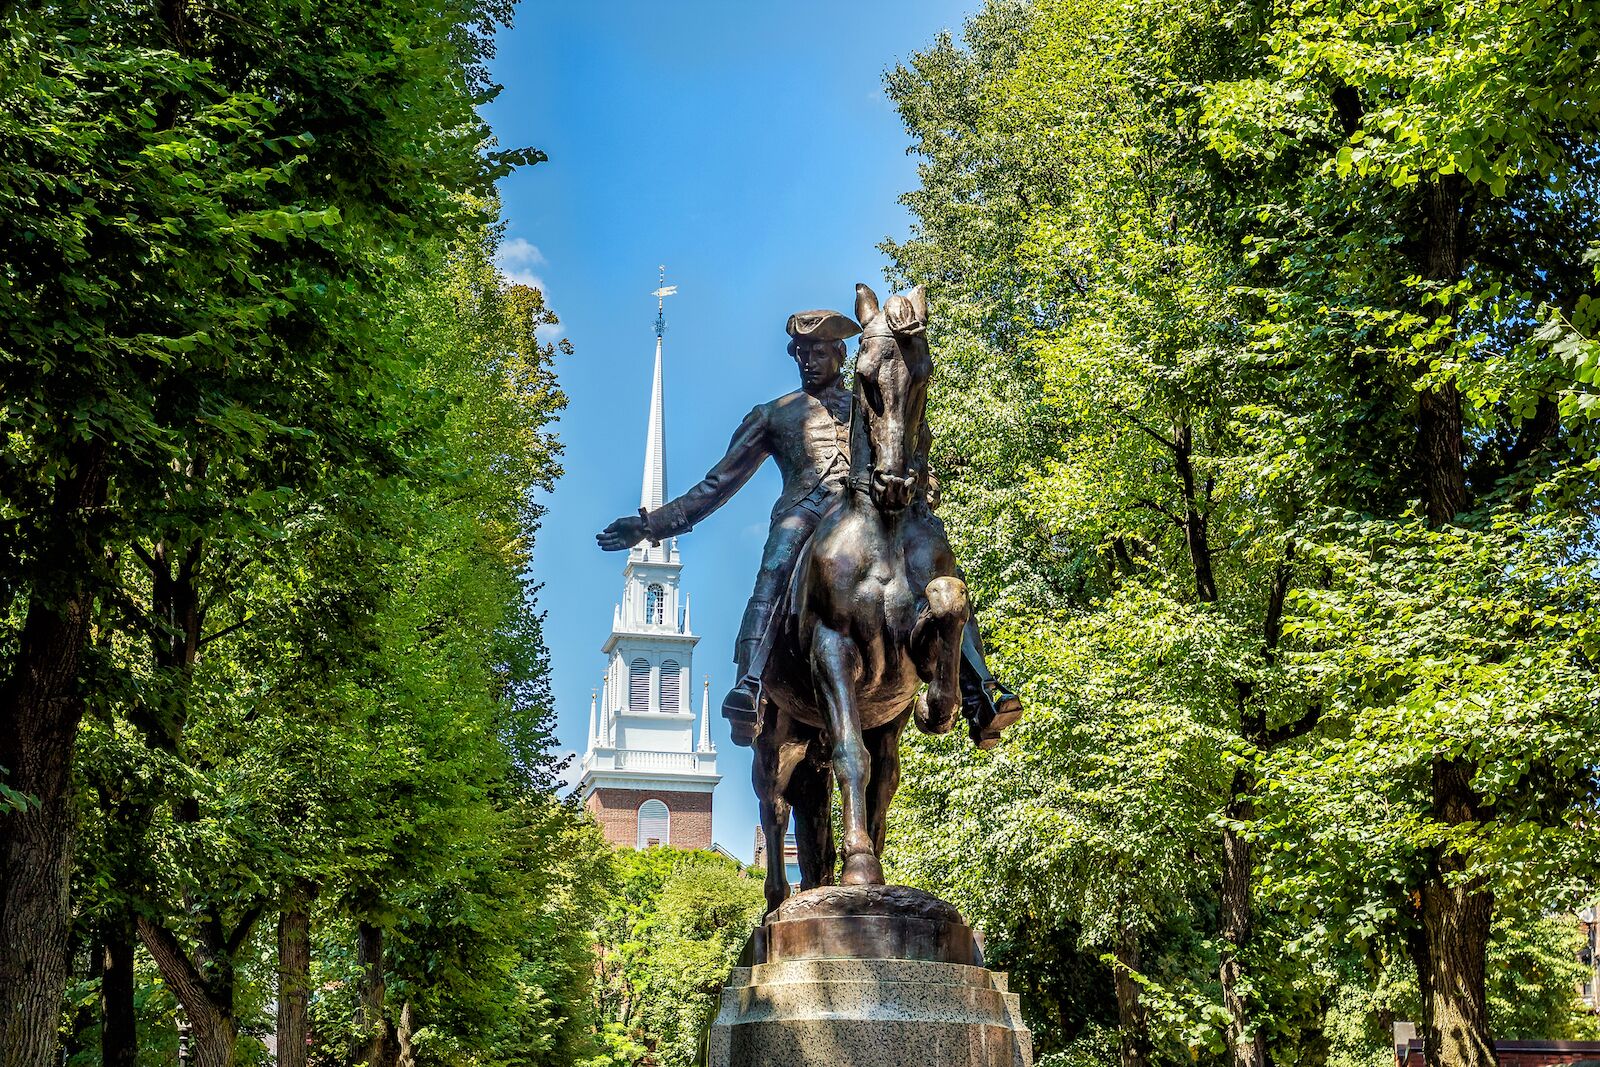 Statue of Paul Revere in front of Old North Church in Boston's Little Italy neighborhood